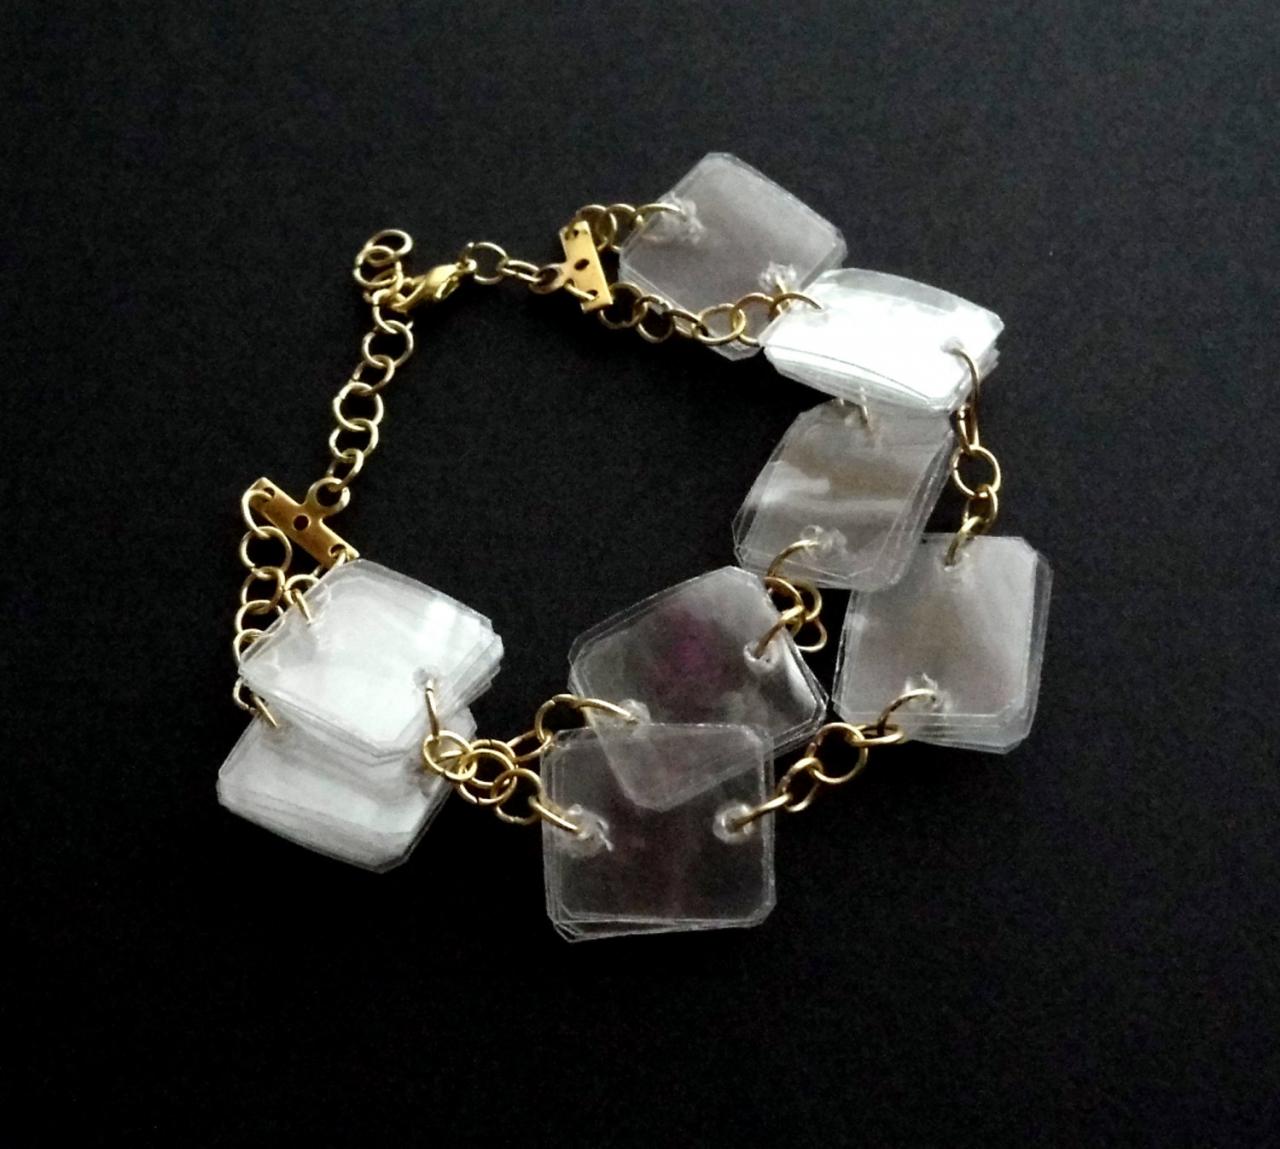 Upcycled Jewelry Eco-friendly Bracelet Made Of Recycled Plastic Bottles, White & Gold, Geometric, Modern